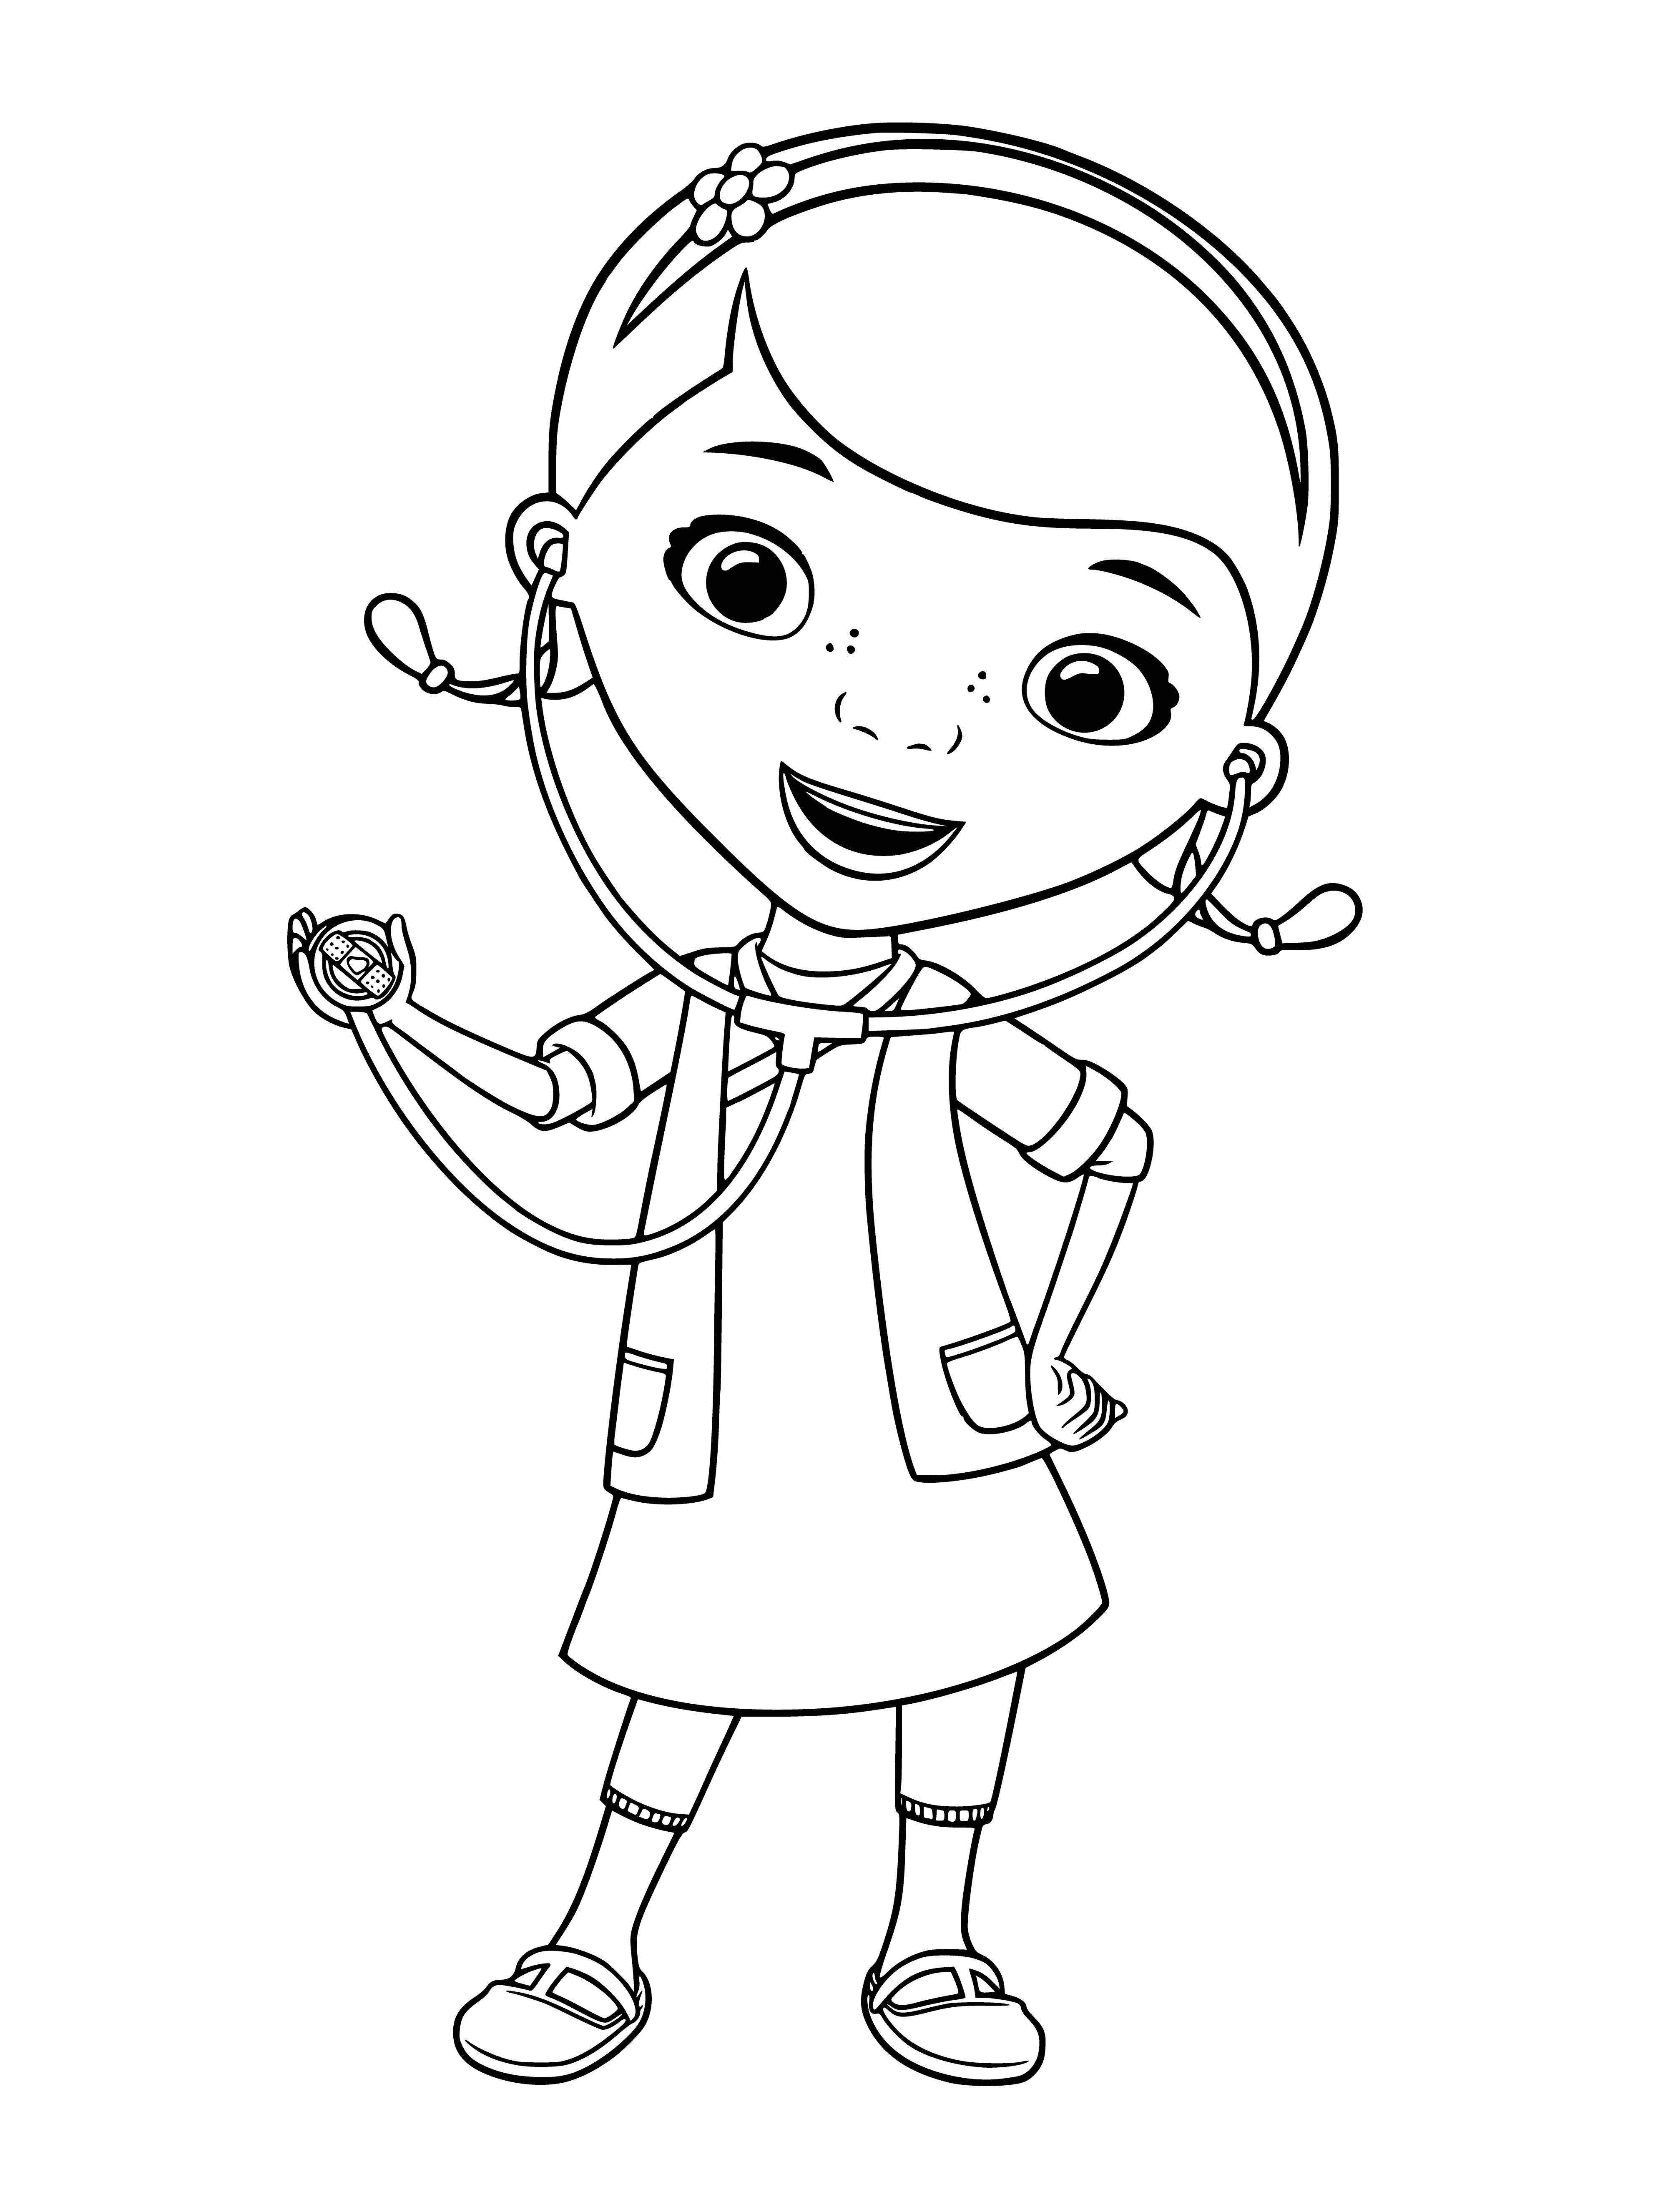 coloring page: Dr. Plusheva is a pink plush toy elephant wearing a stethoscope, lab coat, and holding a clipboard! #cutedoctor #plushielife